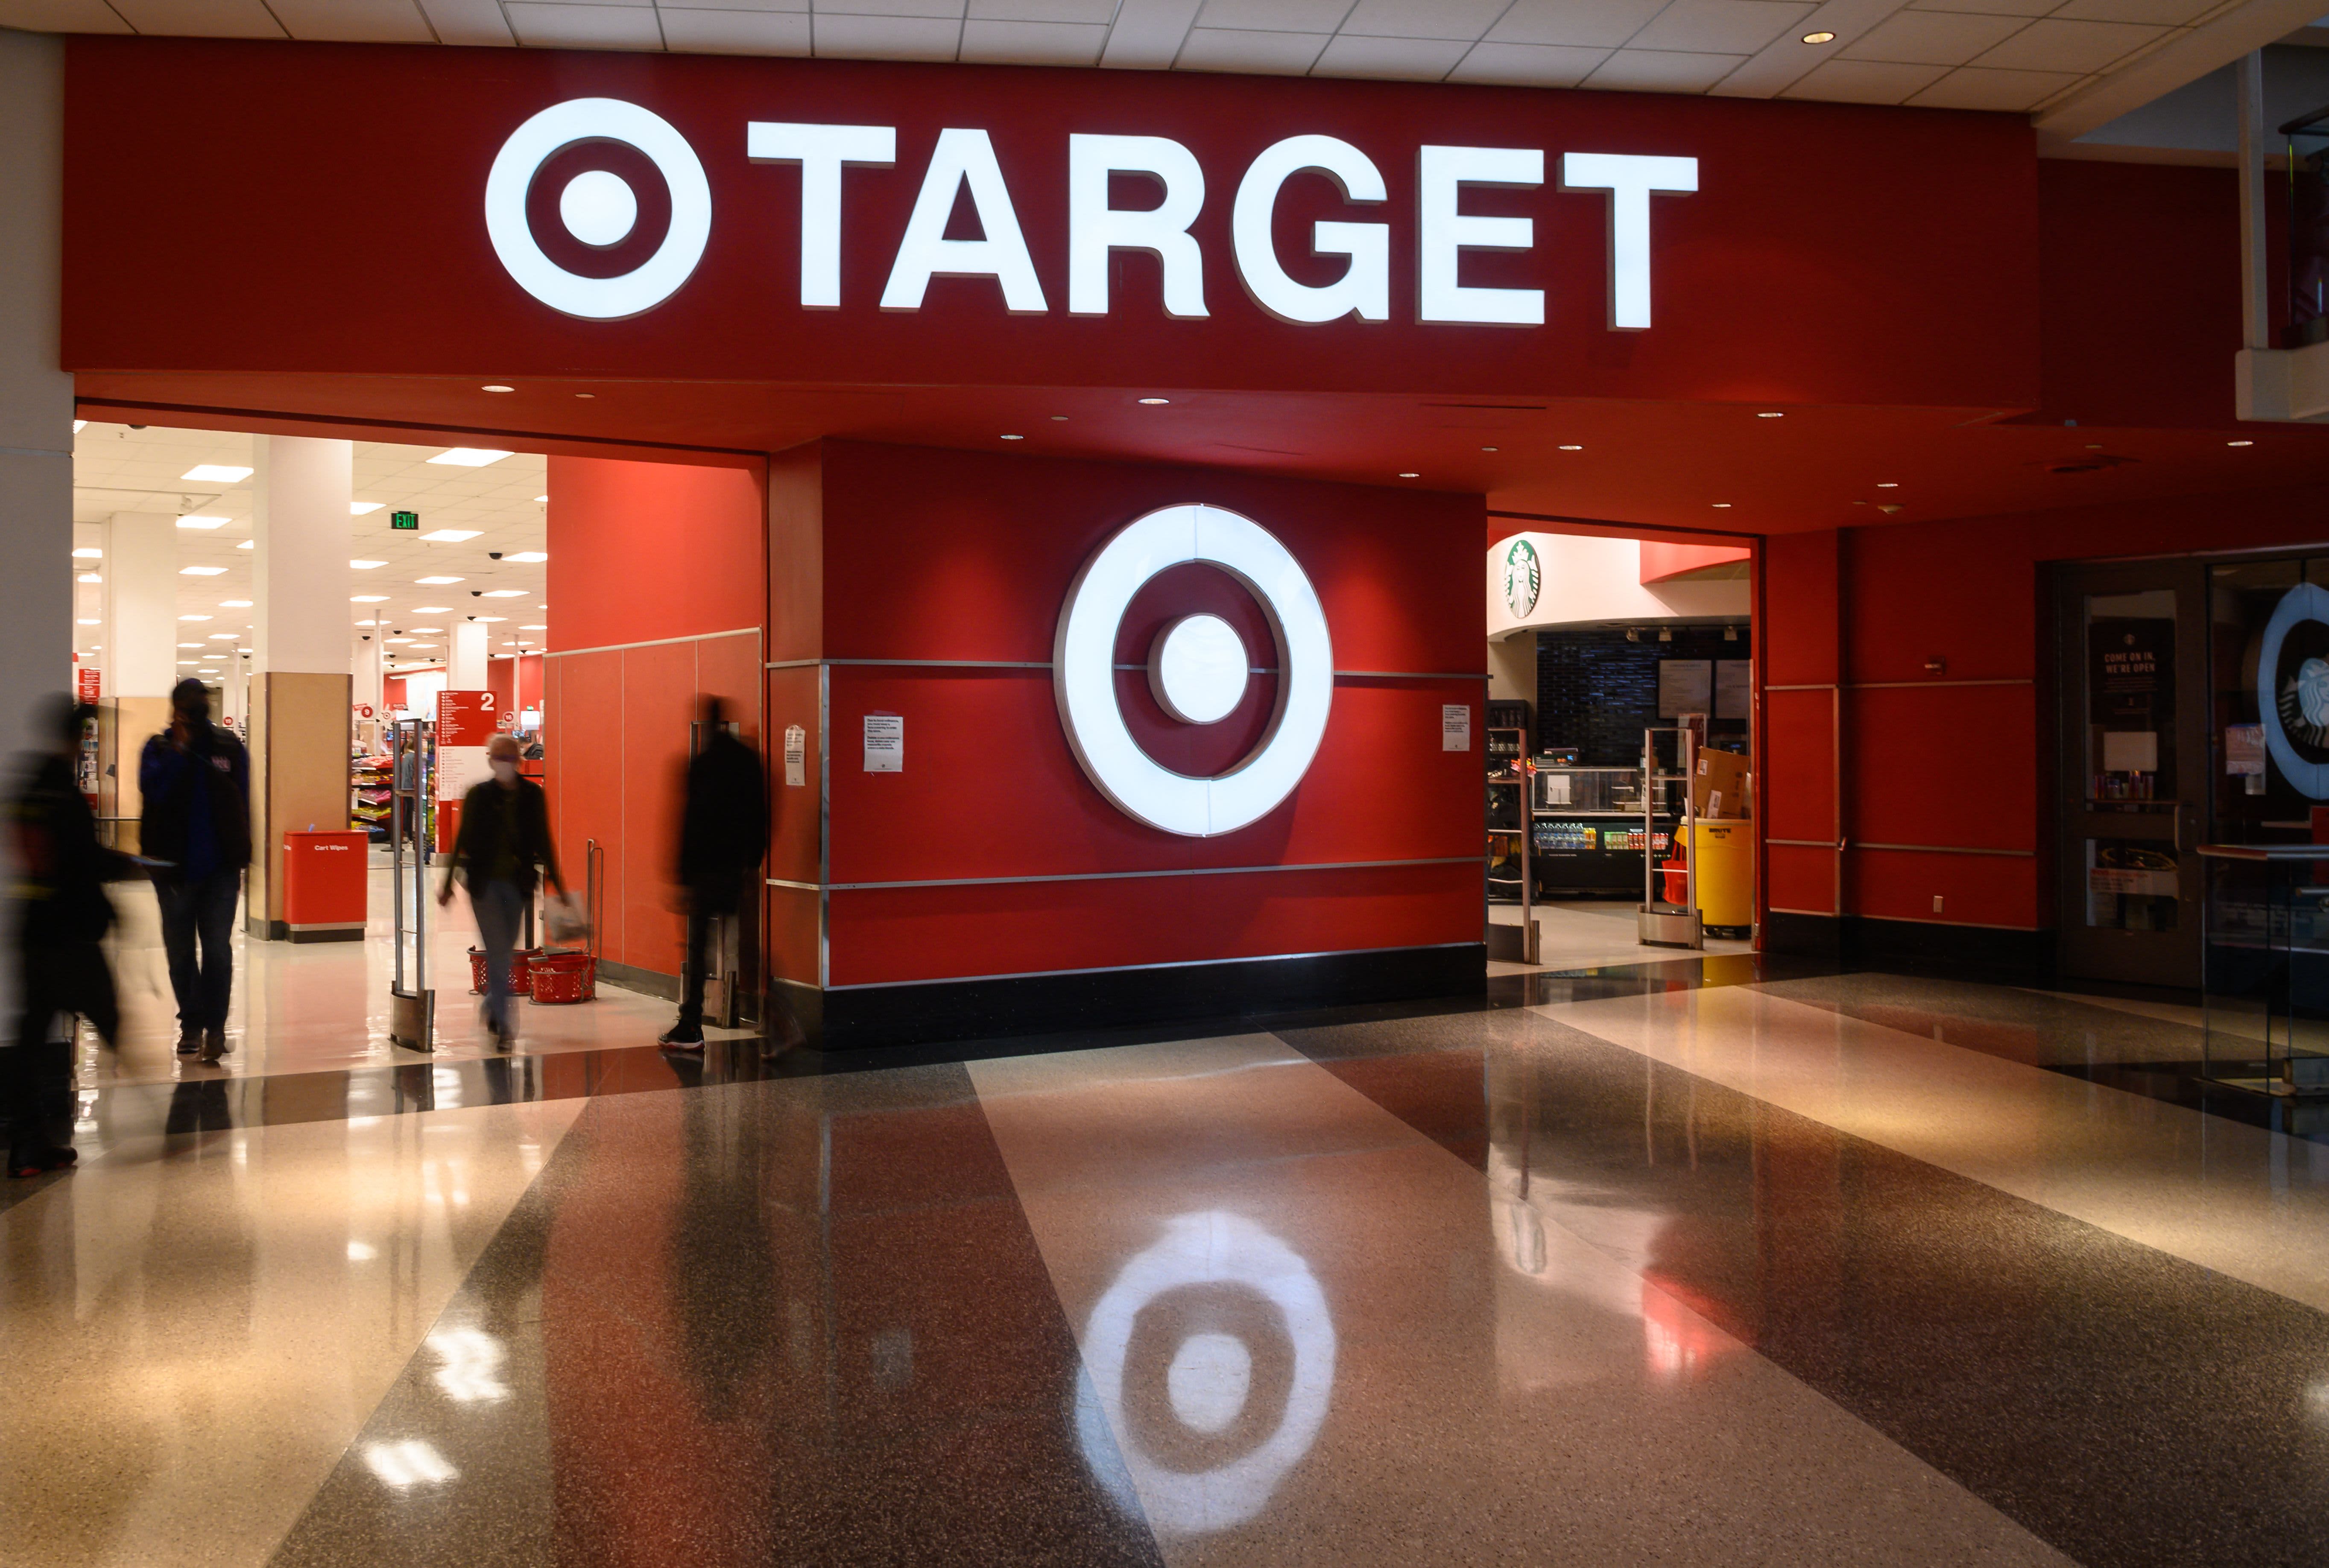 Target (TGT) Q4 2021 earnings